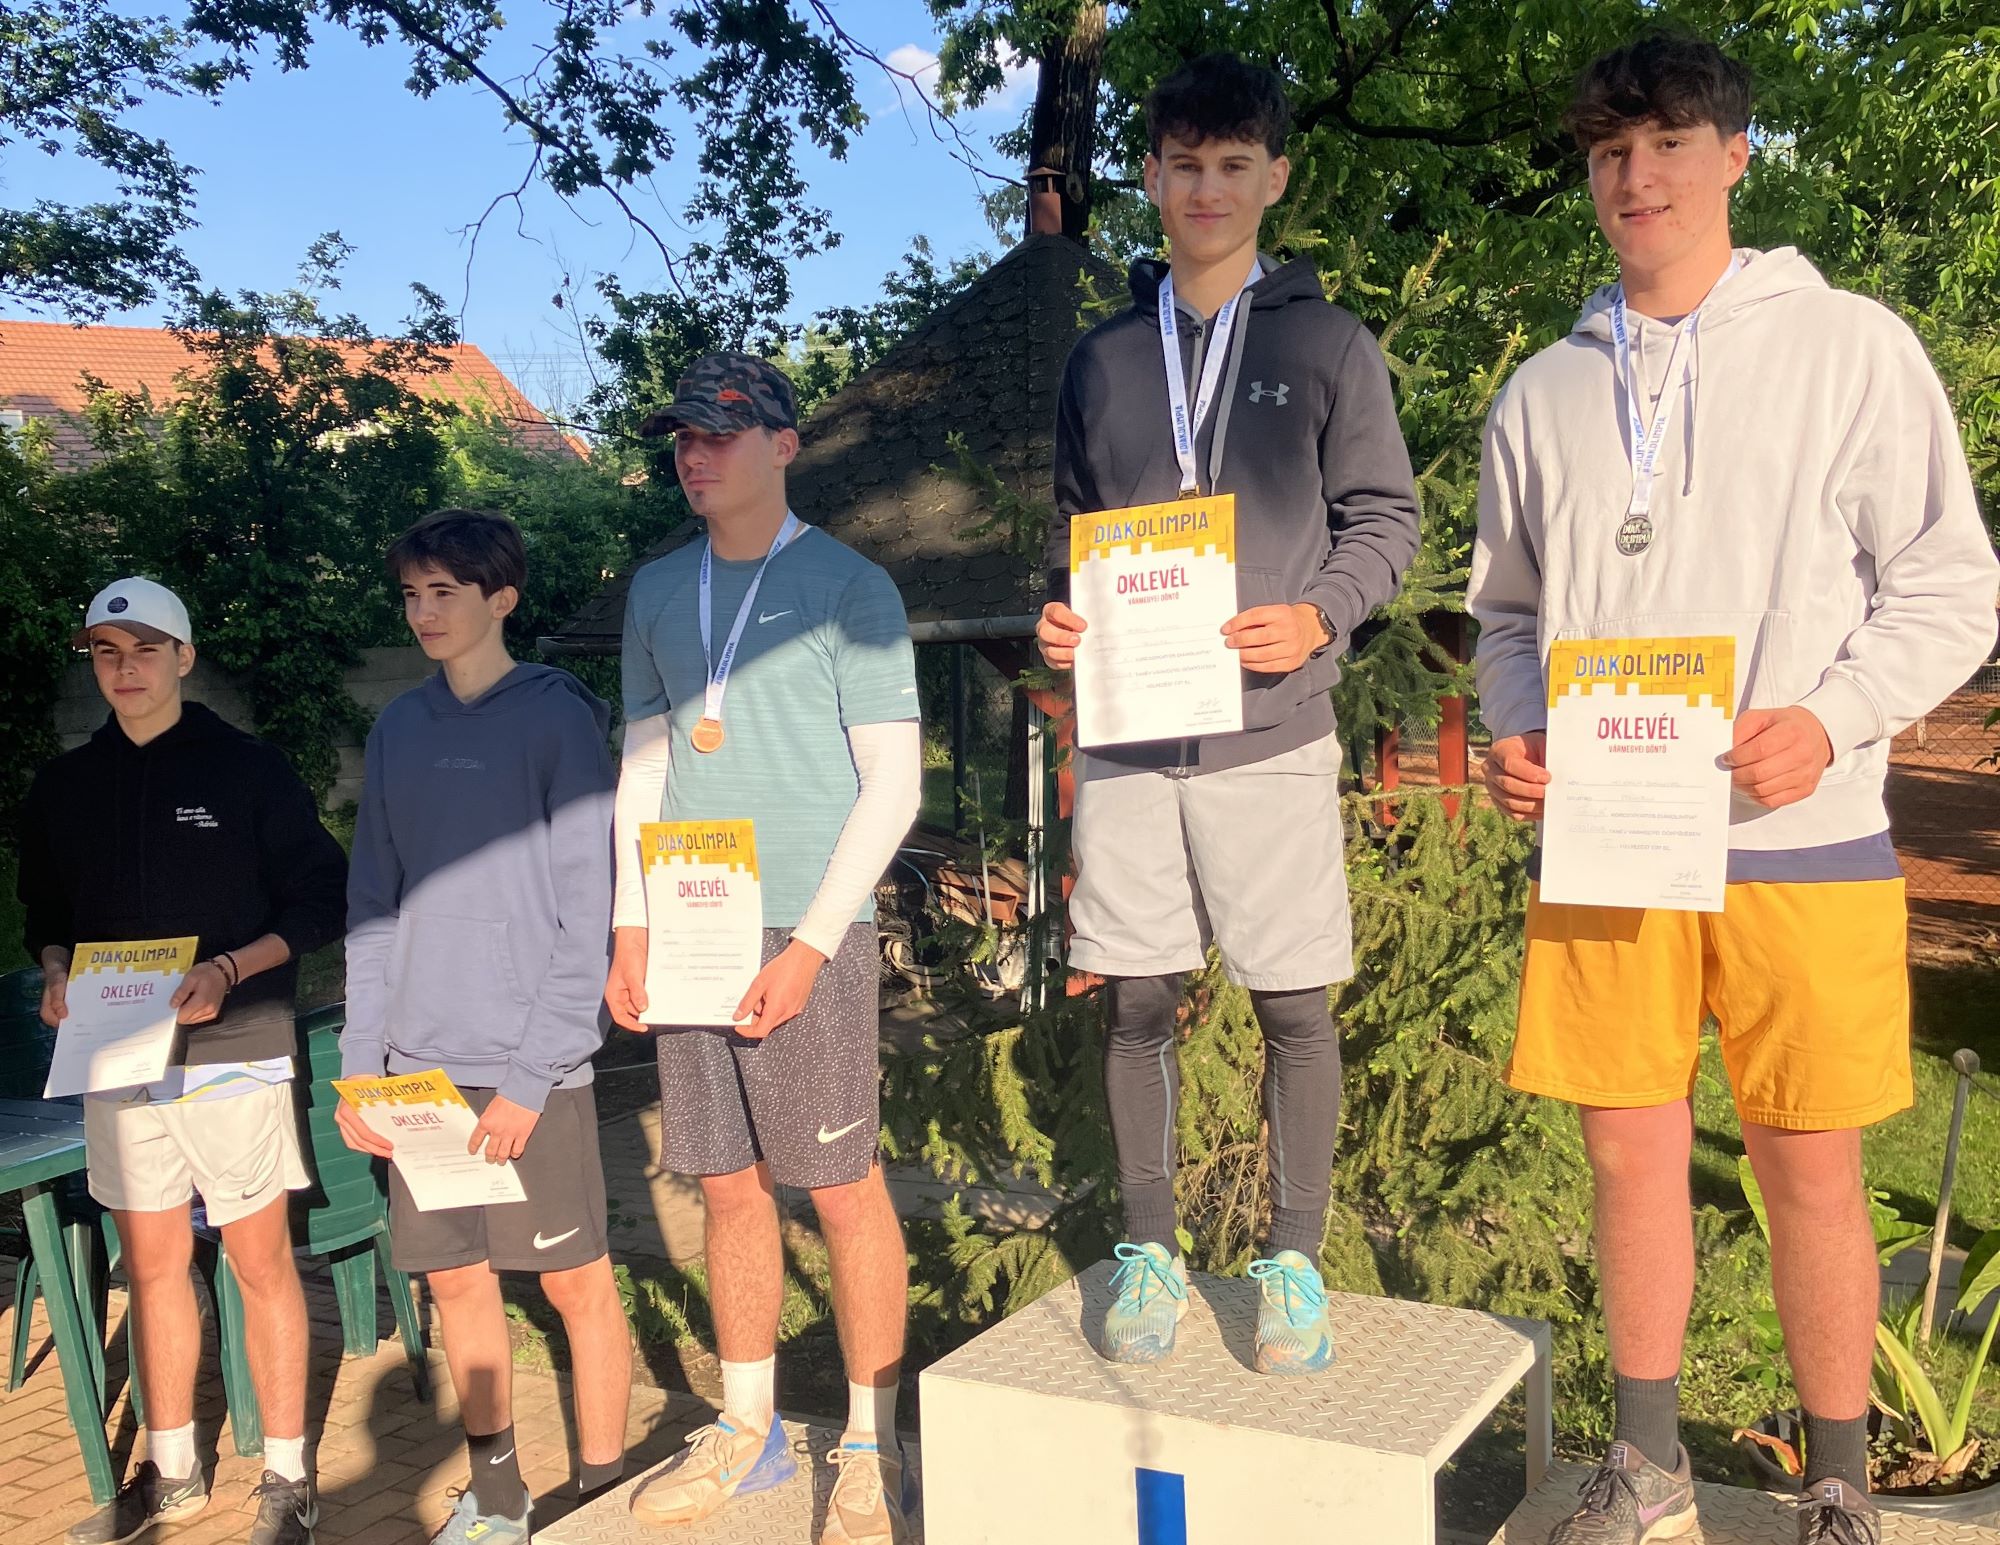 Winning several medals and appearing in the national finals – the record of OVTK tennis players at the Student Olympiad